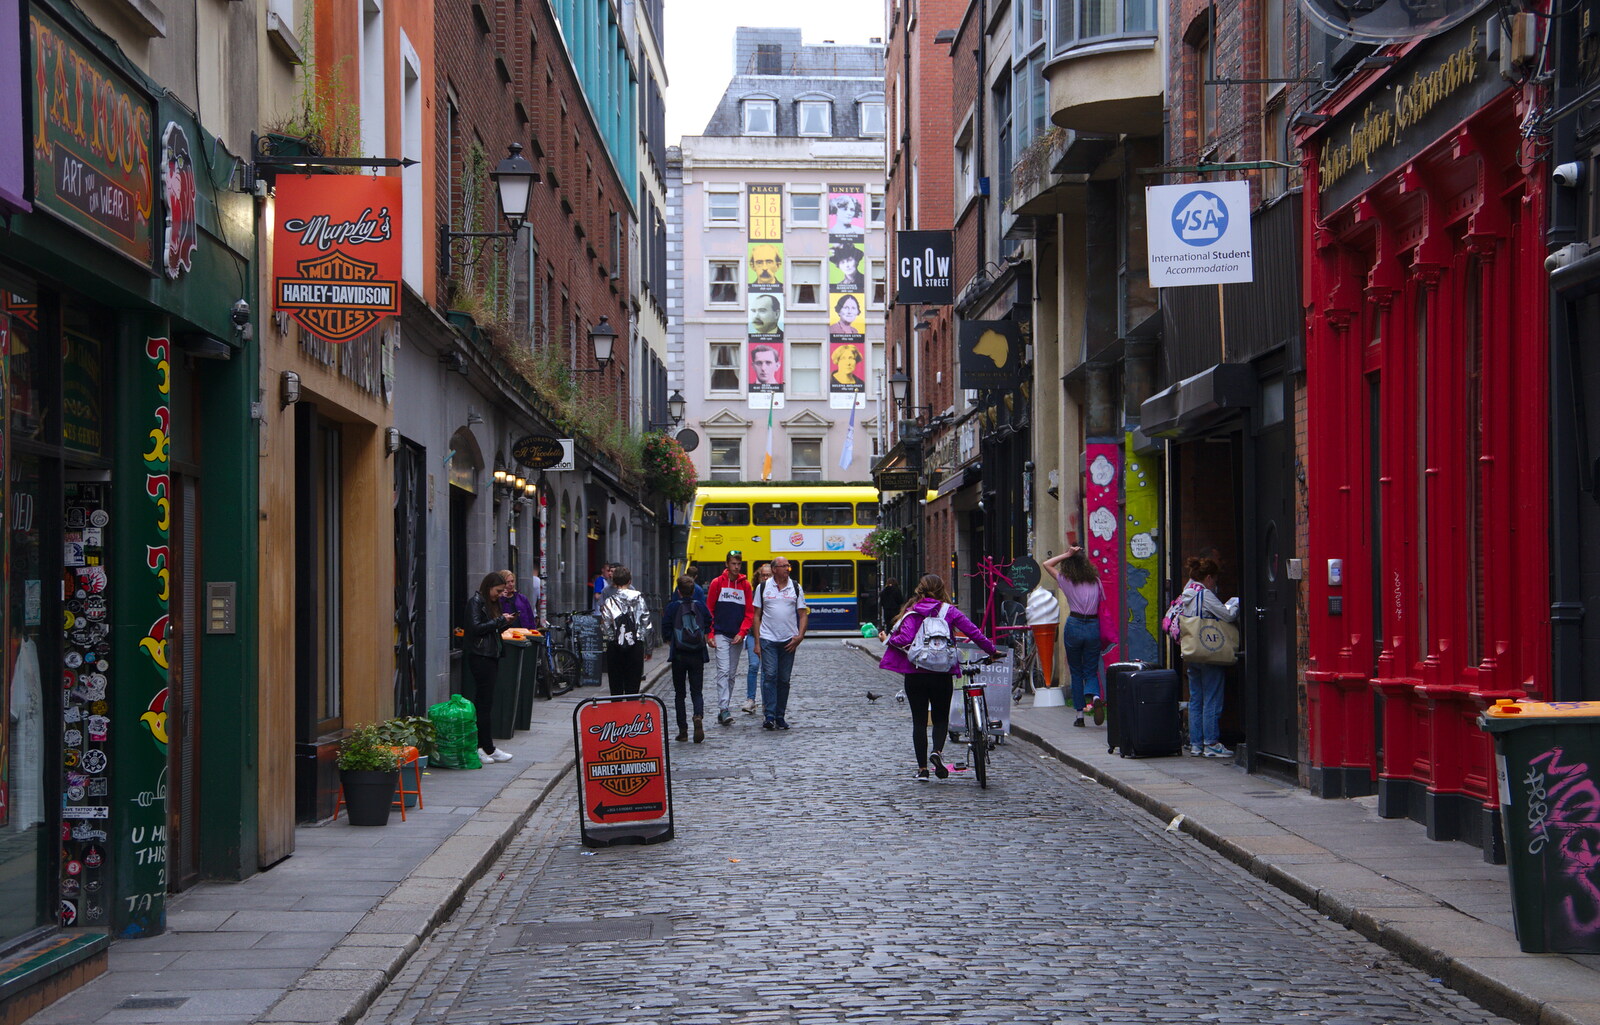 More Temple Bar streets from Busking in Temple Bar, Dublin, Ireland - 12th August 2019